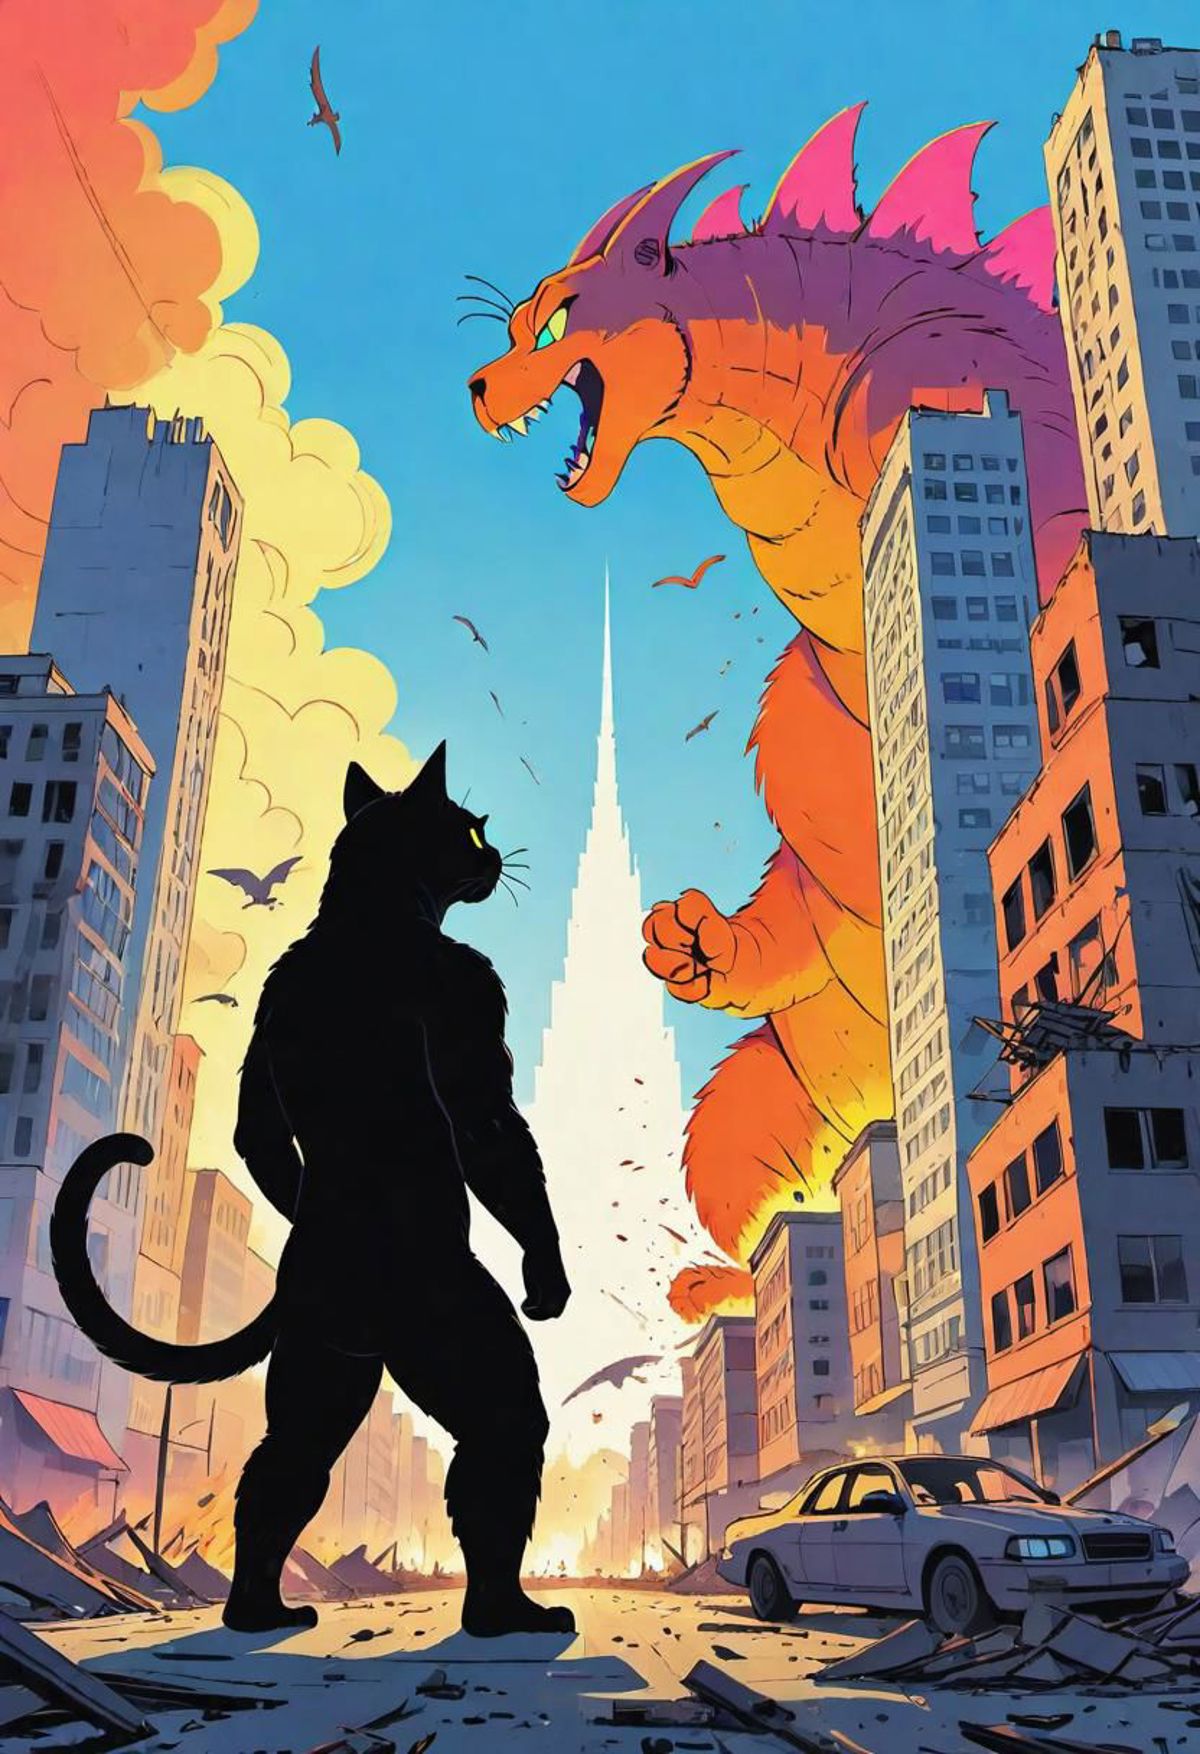 A comic book cover featuring a cat and a giant monster.